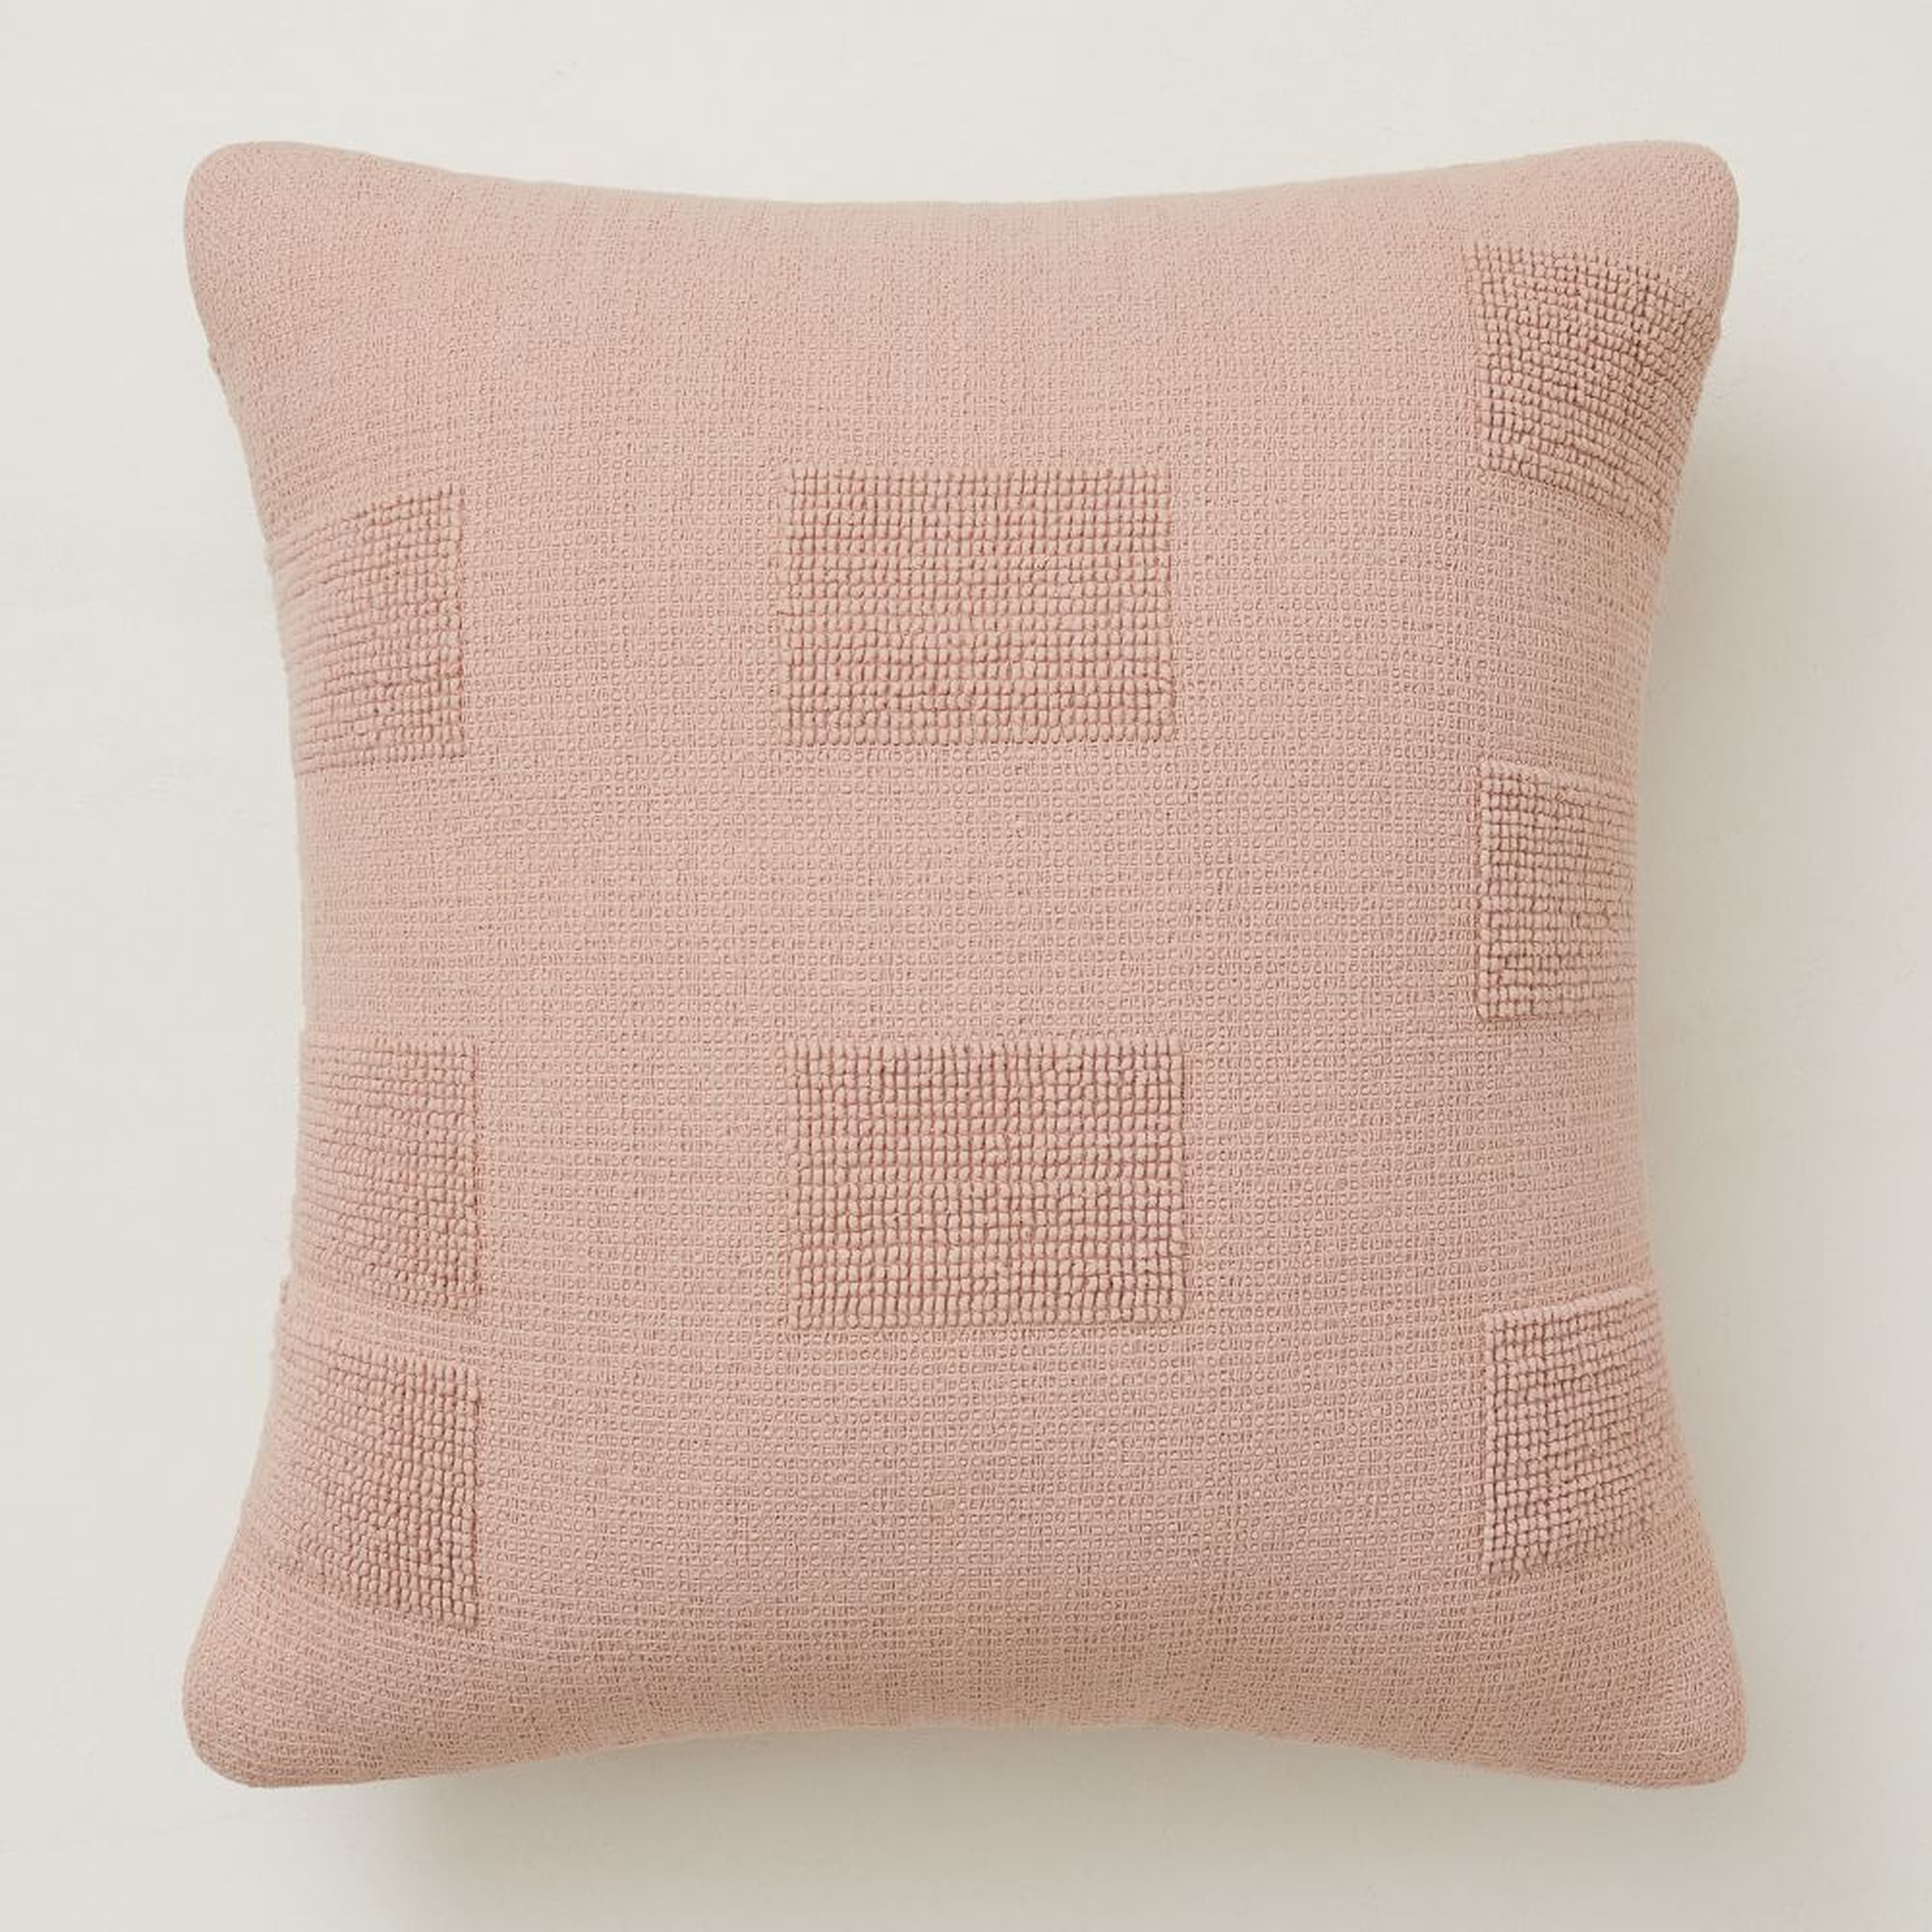 Outdoor Tufted Grid Pillow, 24"x24", Pink Stone - West Elm